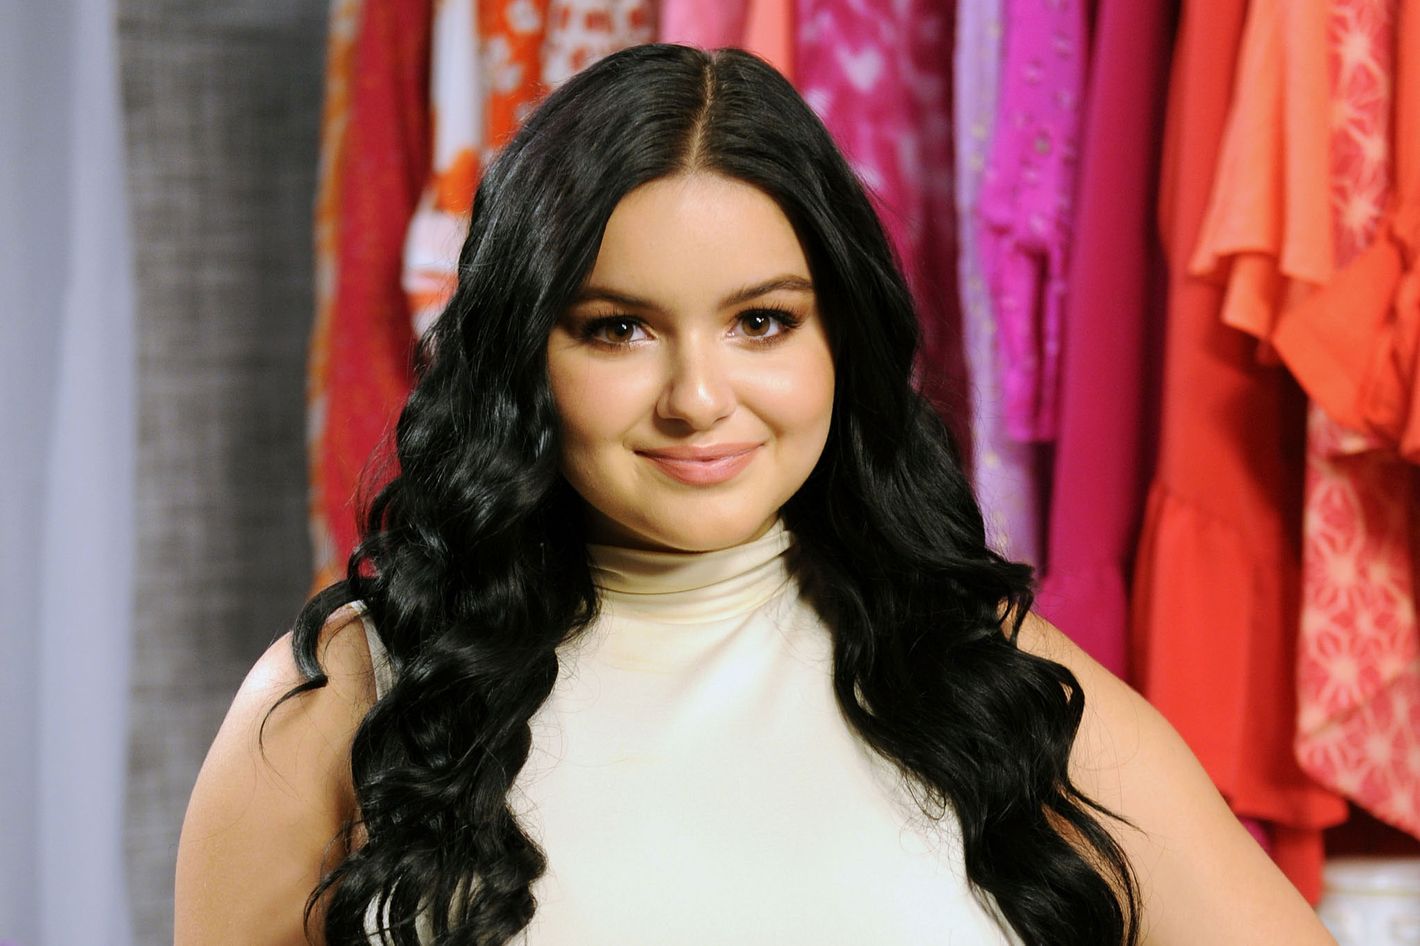 Nice Celeb and Girls on X: Ariel Winter boobs pop out candids